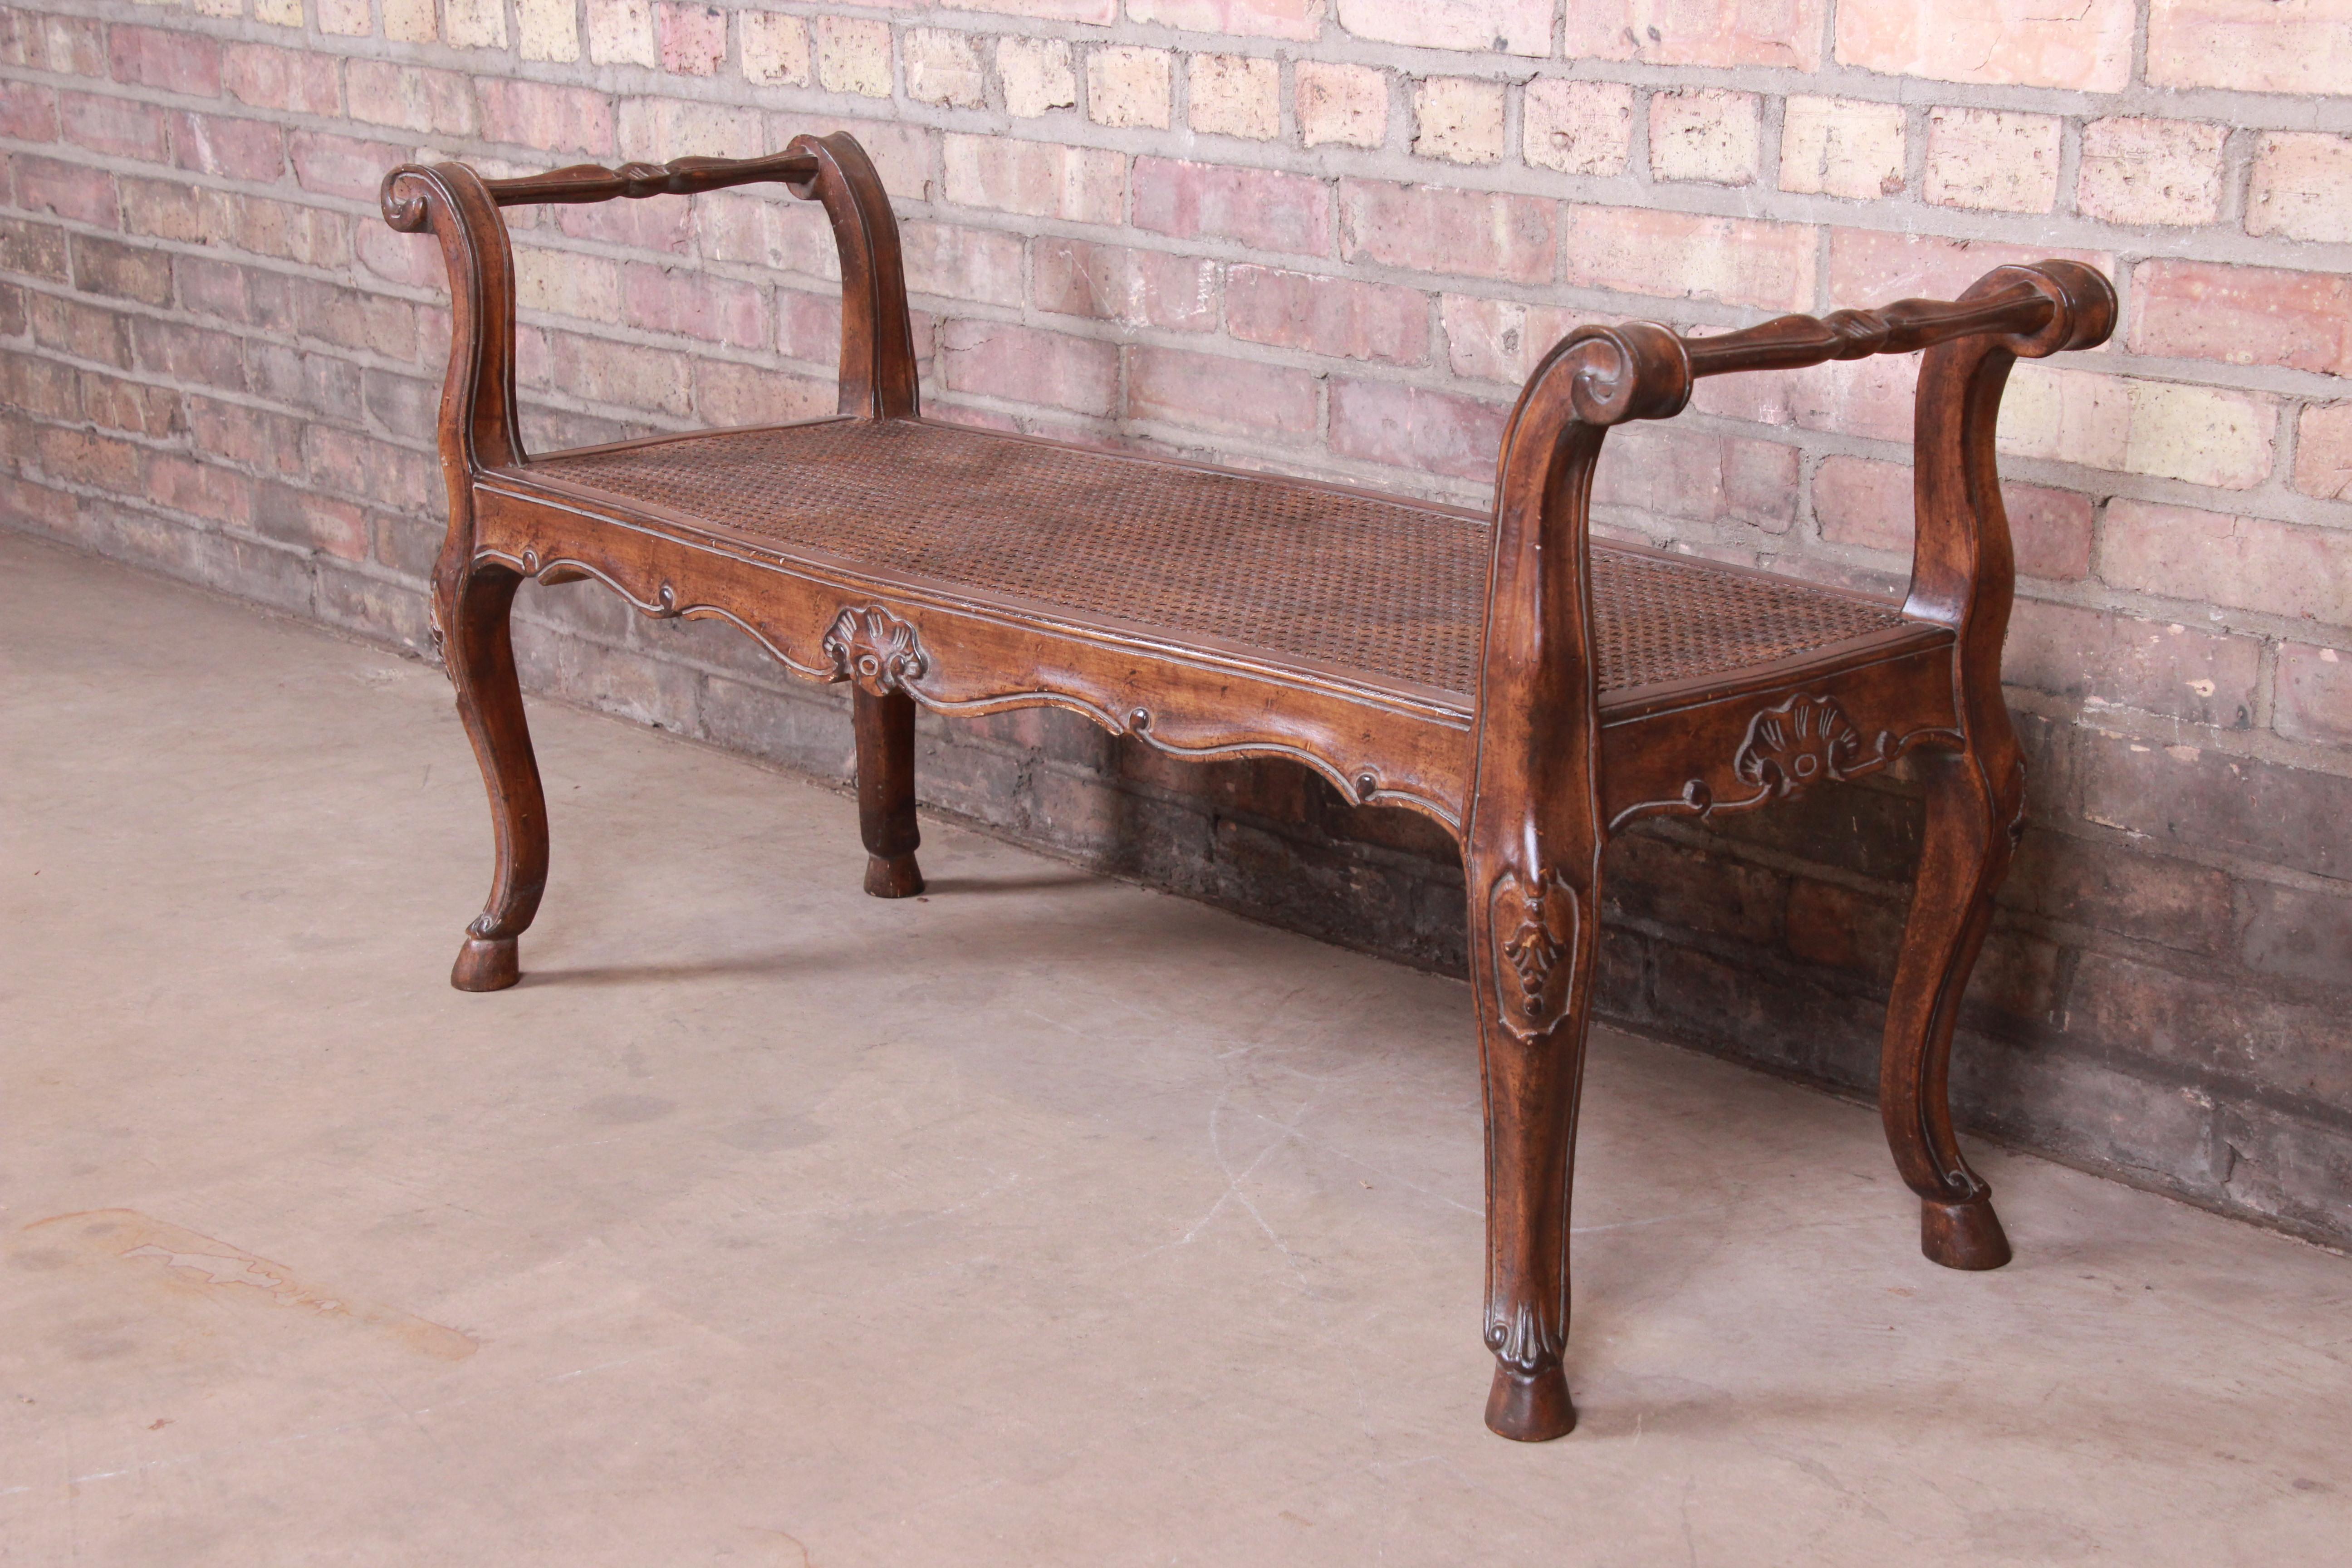 A gorgeous French Provincial Louis XV style window bench or bed bench

Mid-20th century

Carved walnut, with cane seating.

Measures: 43.5